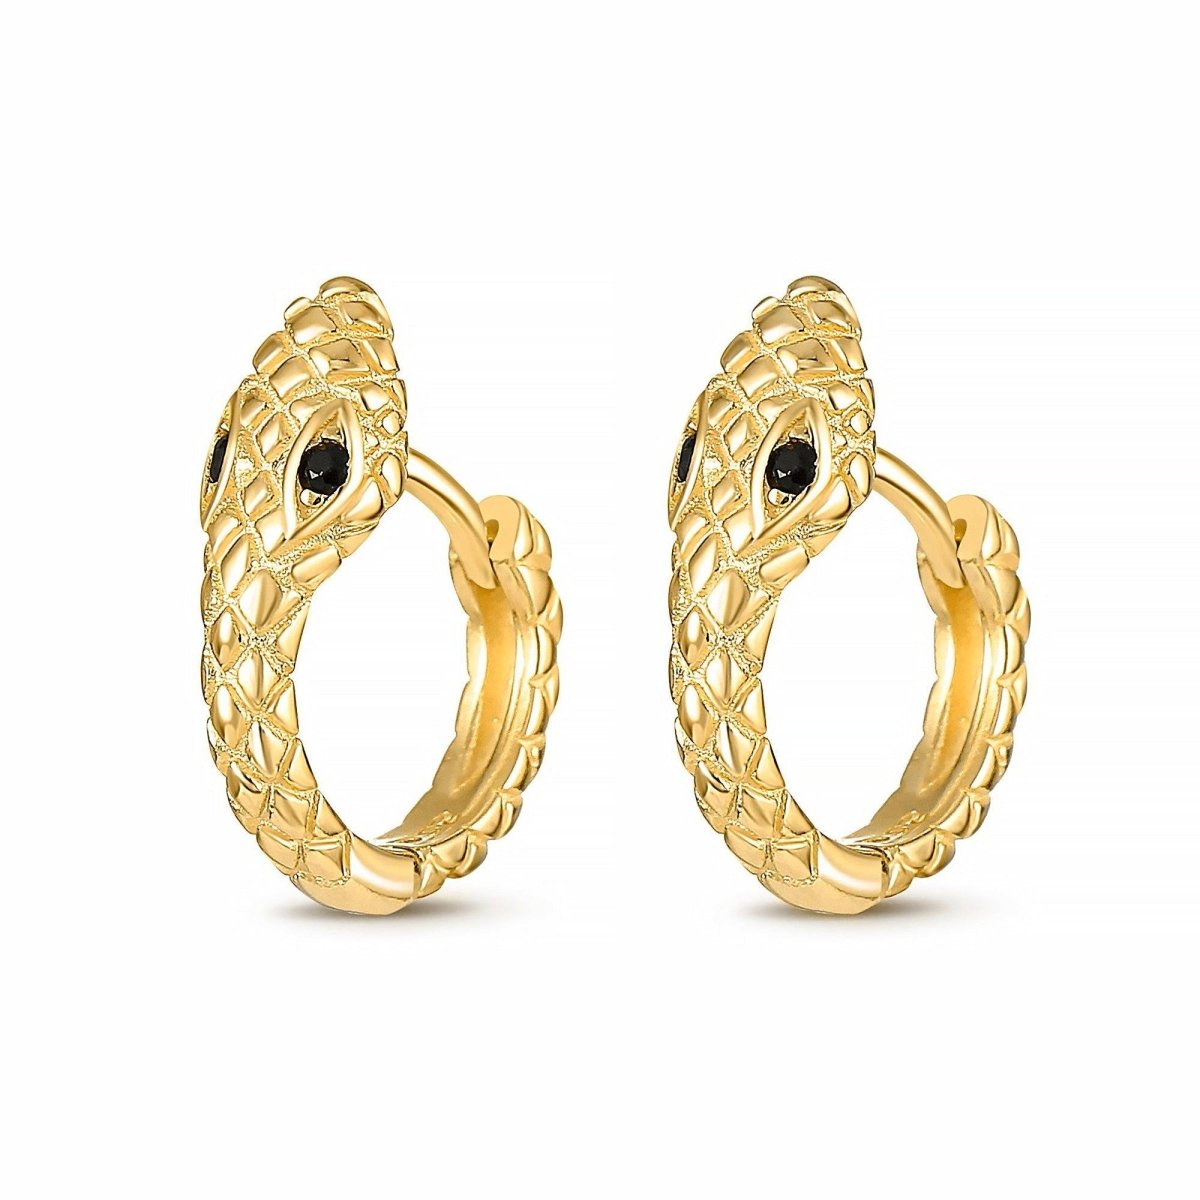 Latest gold and jewelry | Gold earrings for kids, Silver jewelry fashion,  Modern gold jewelry